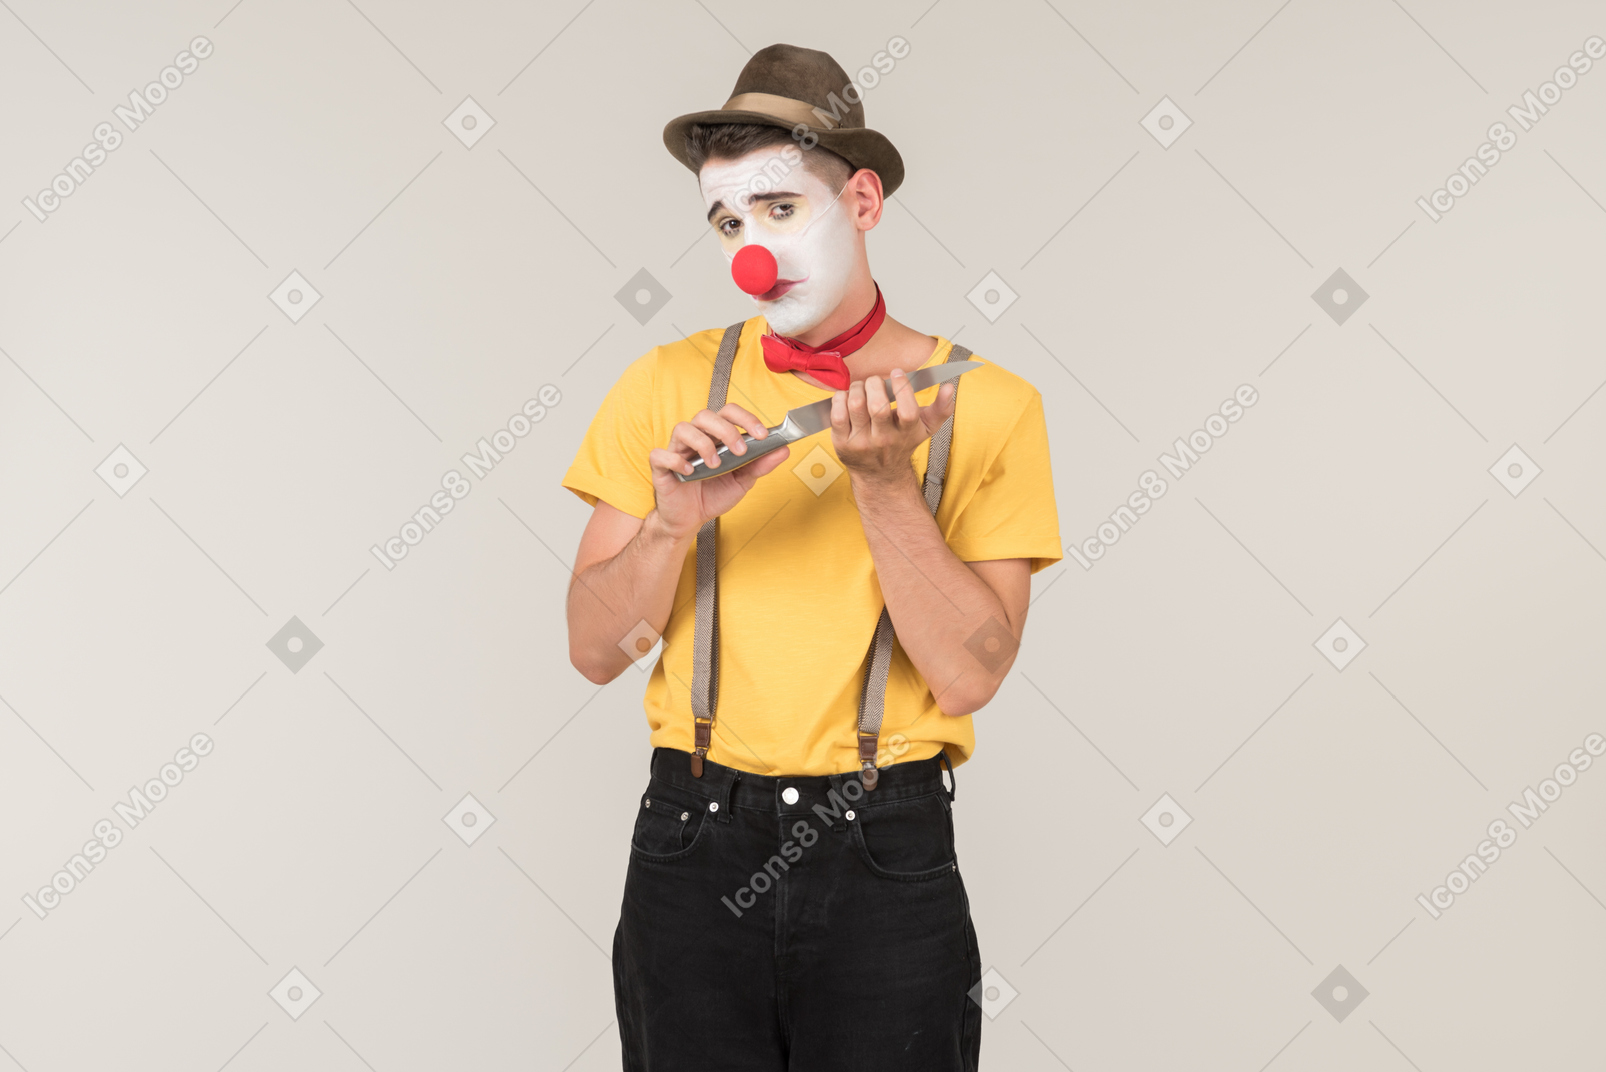 Male clown using knife as nail file